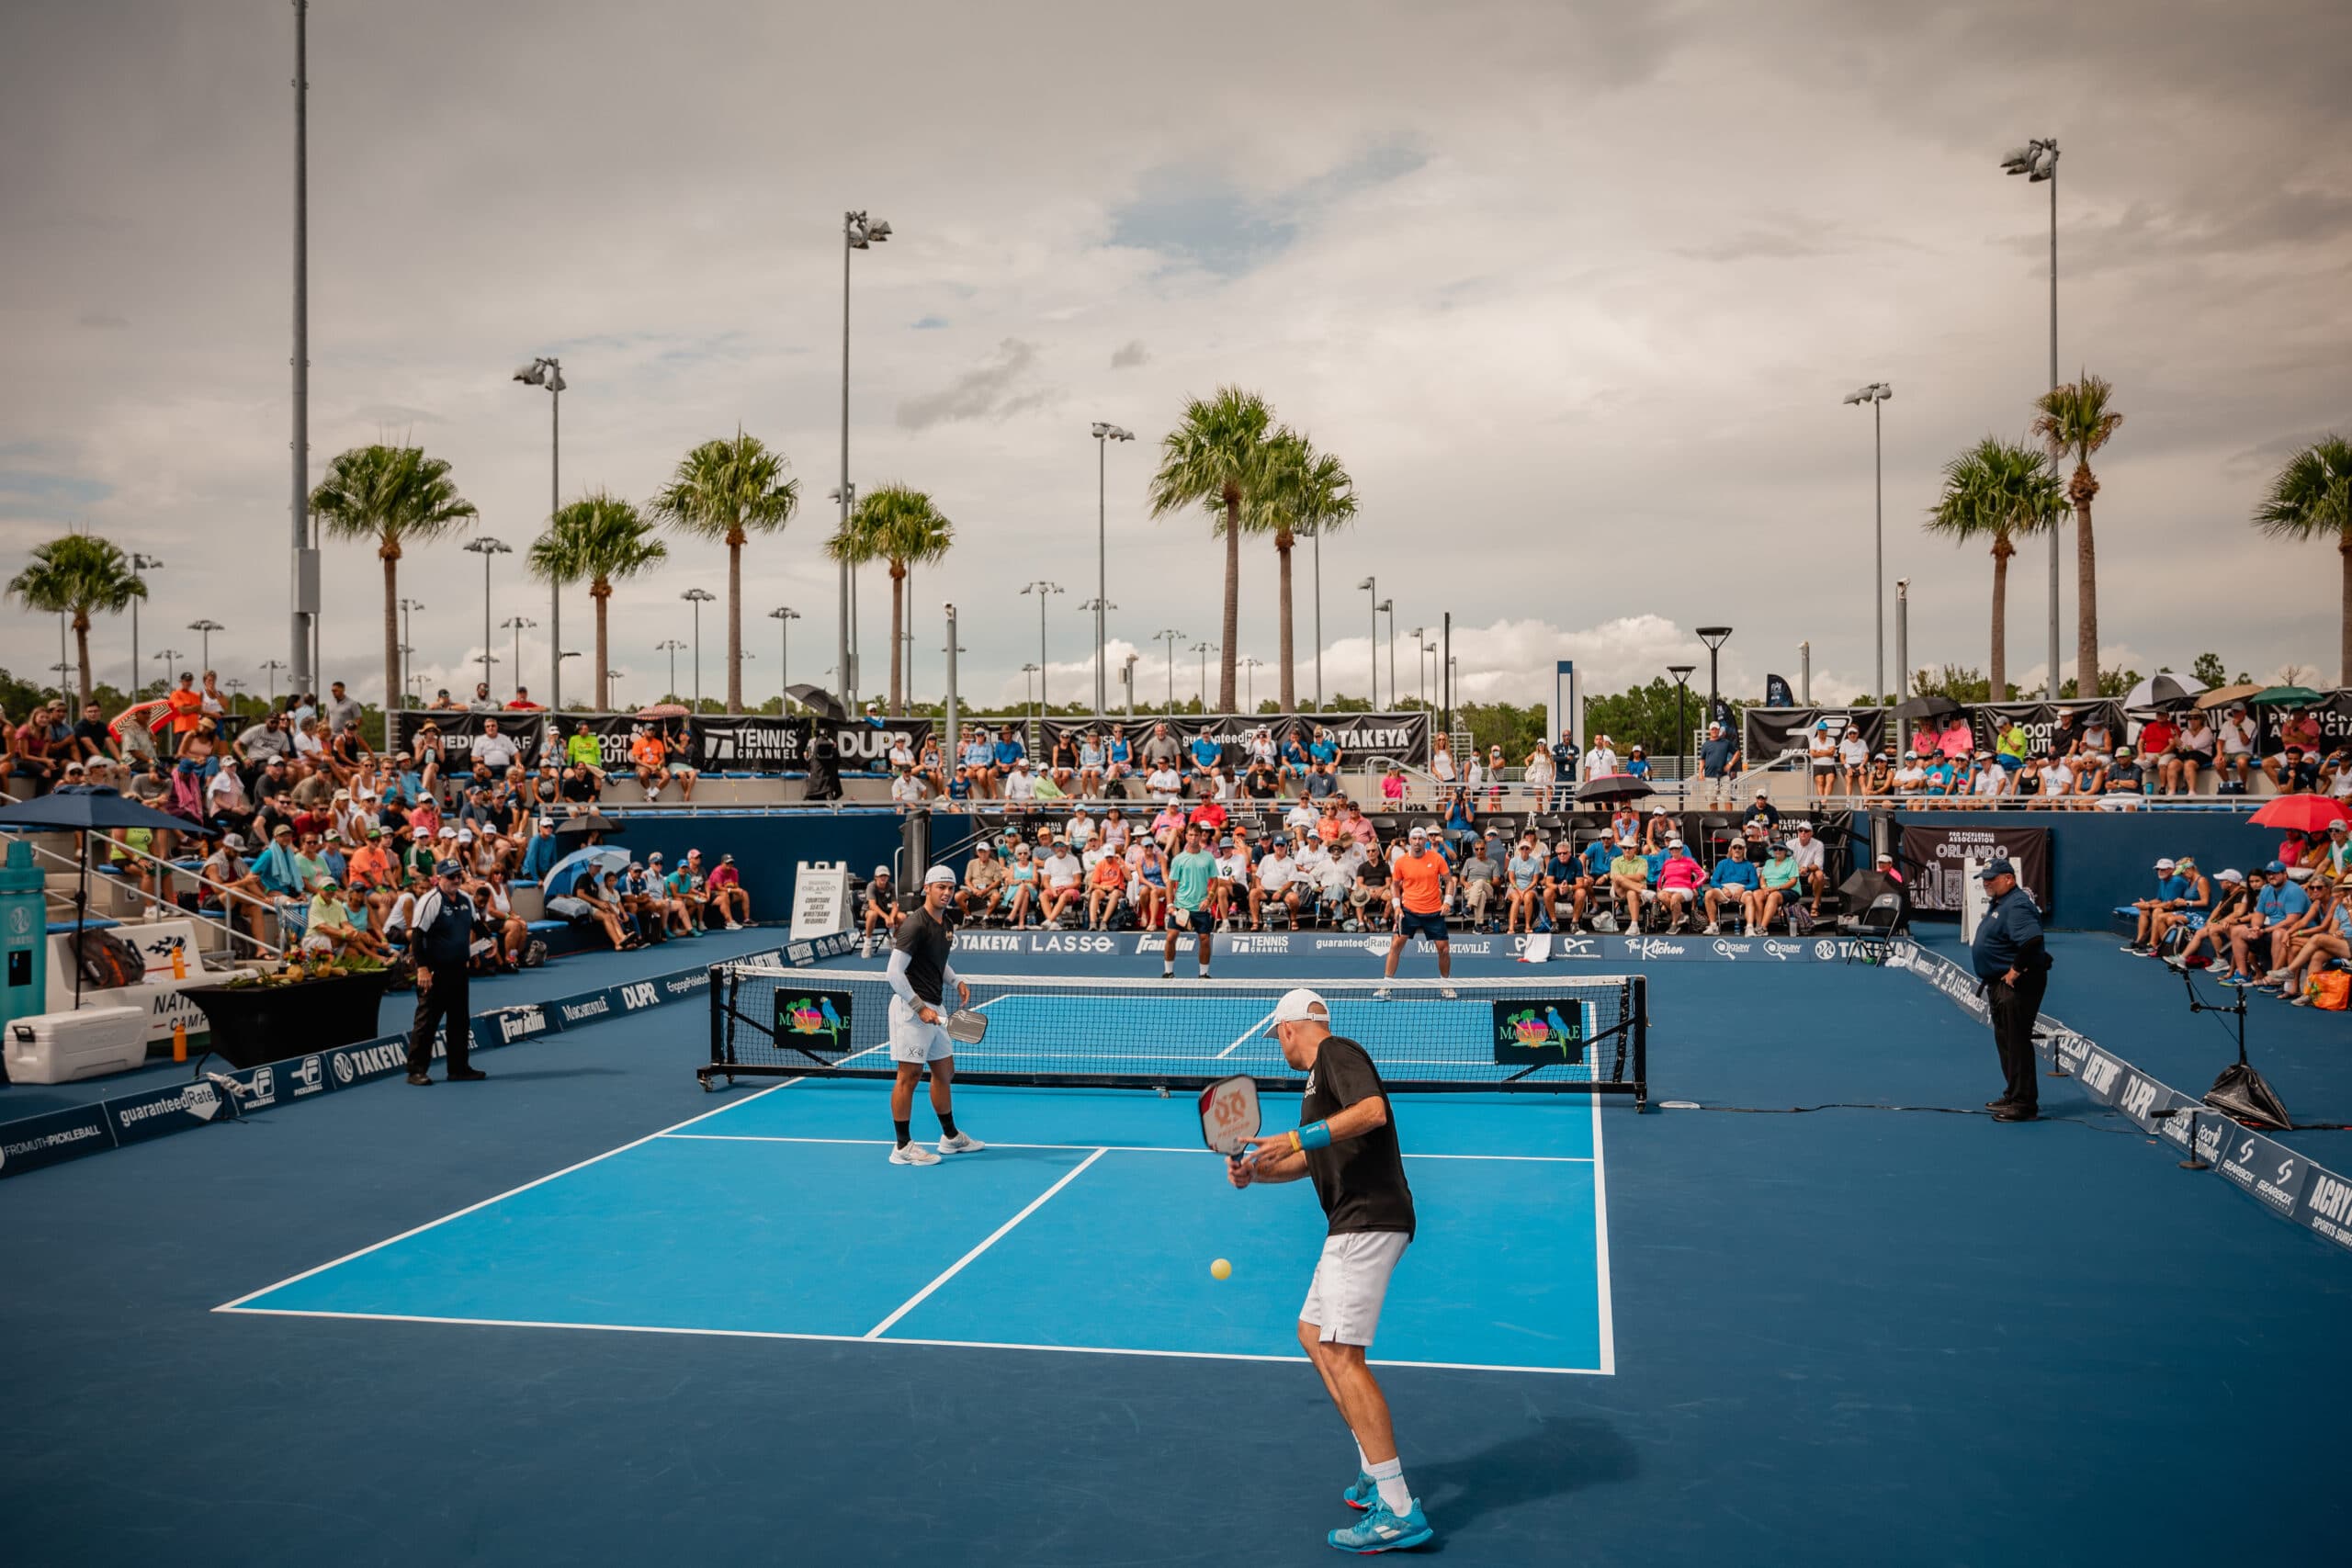 Gender Doubles Tennis Channel, New Faces, and First-Time Titlists PPA Tour